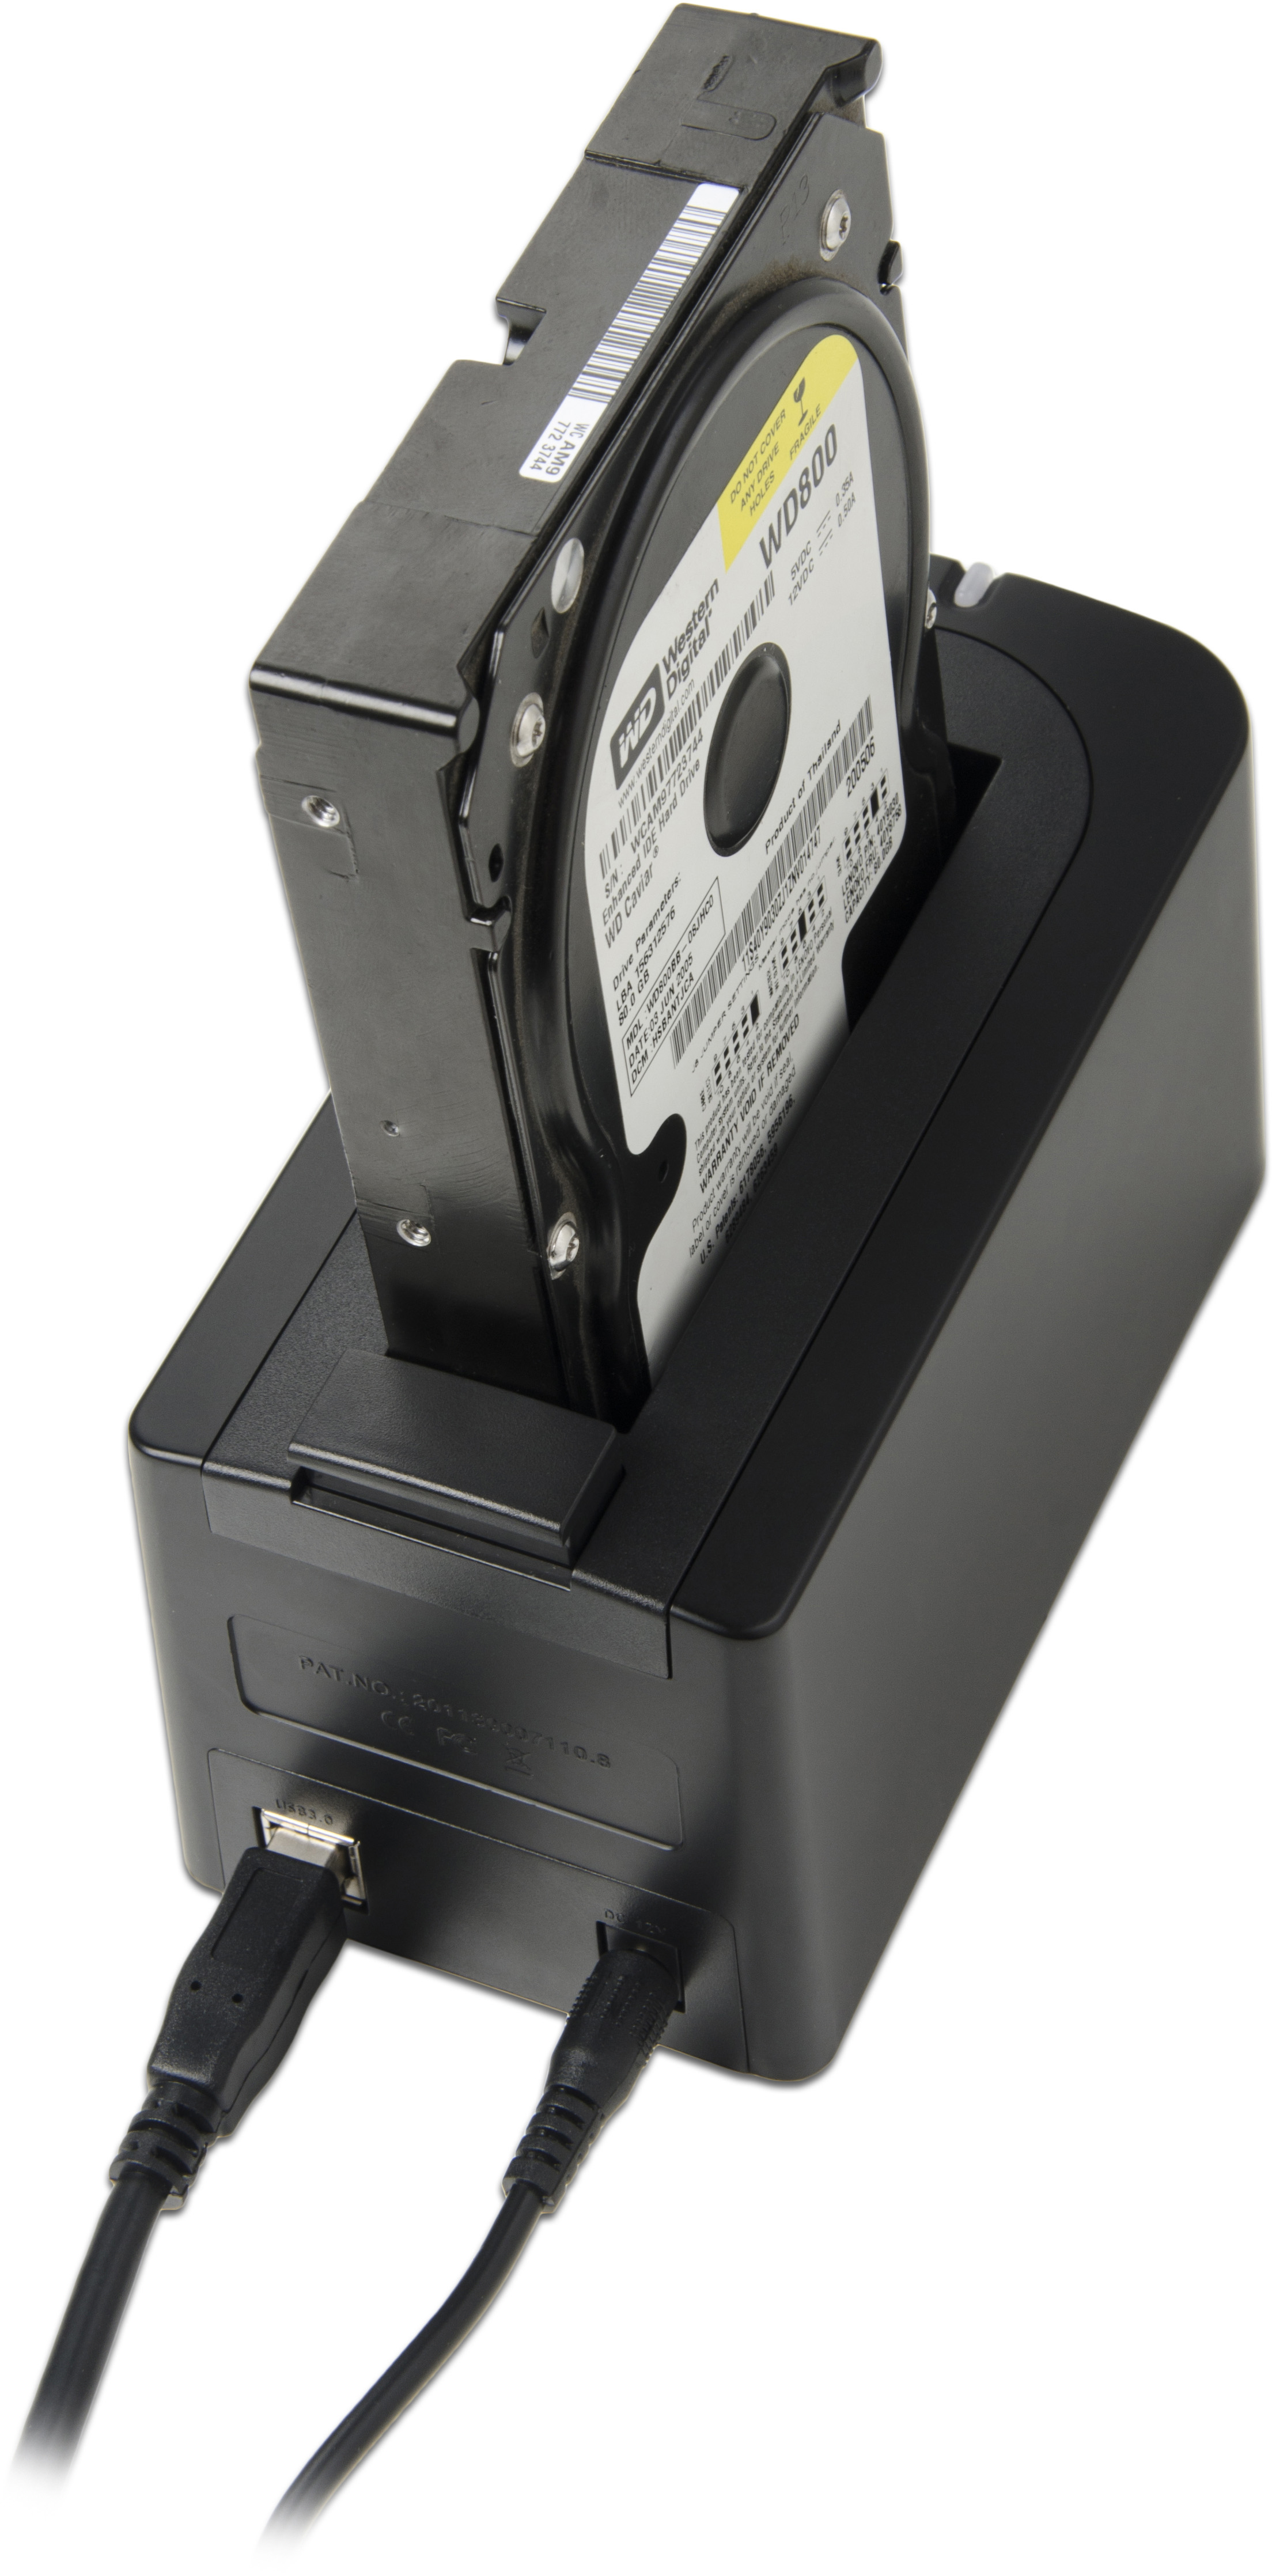 hdd docking station drivers